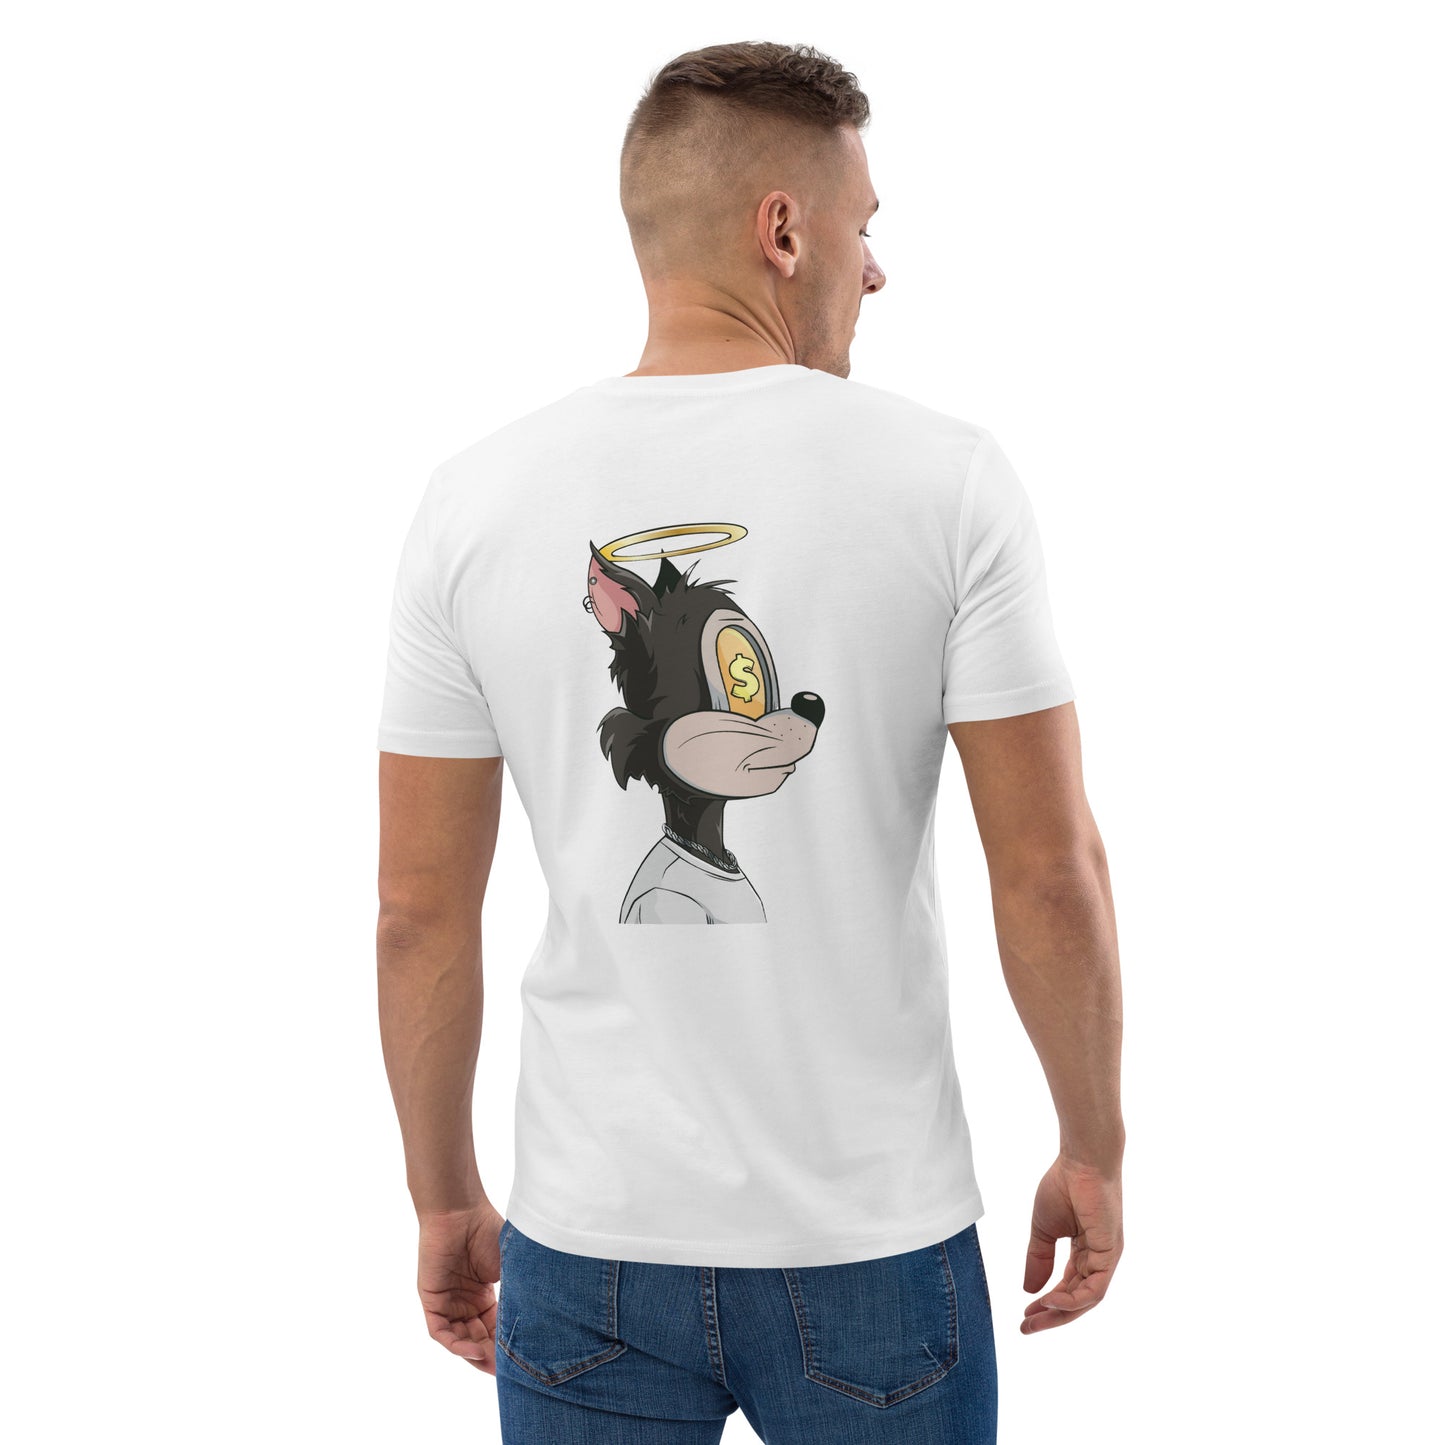 Unisex organic cotton t-shirt feat. TOON #590  (front embroidered + rear print)